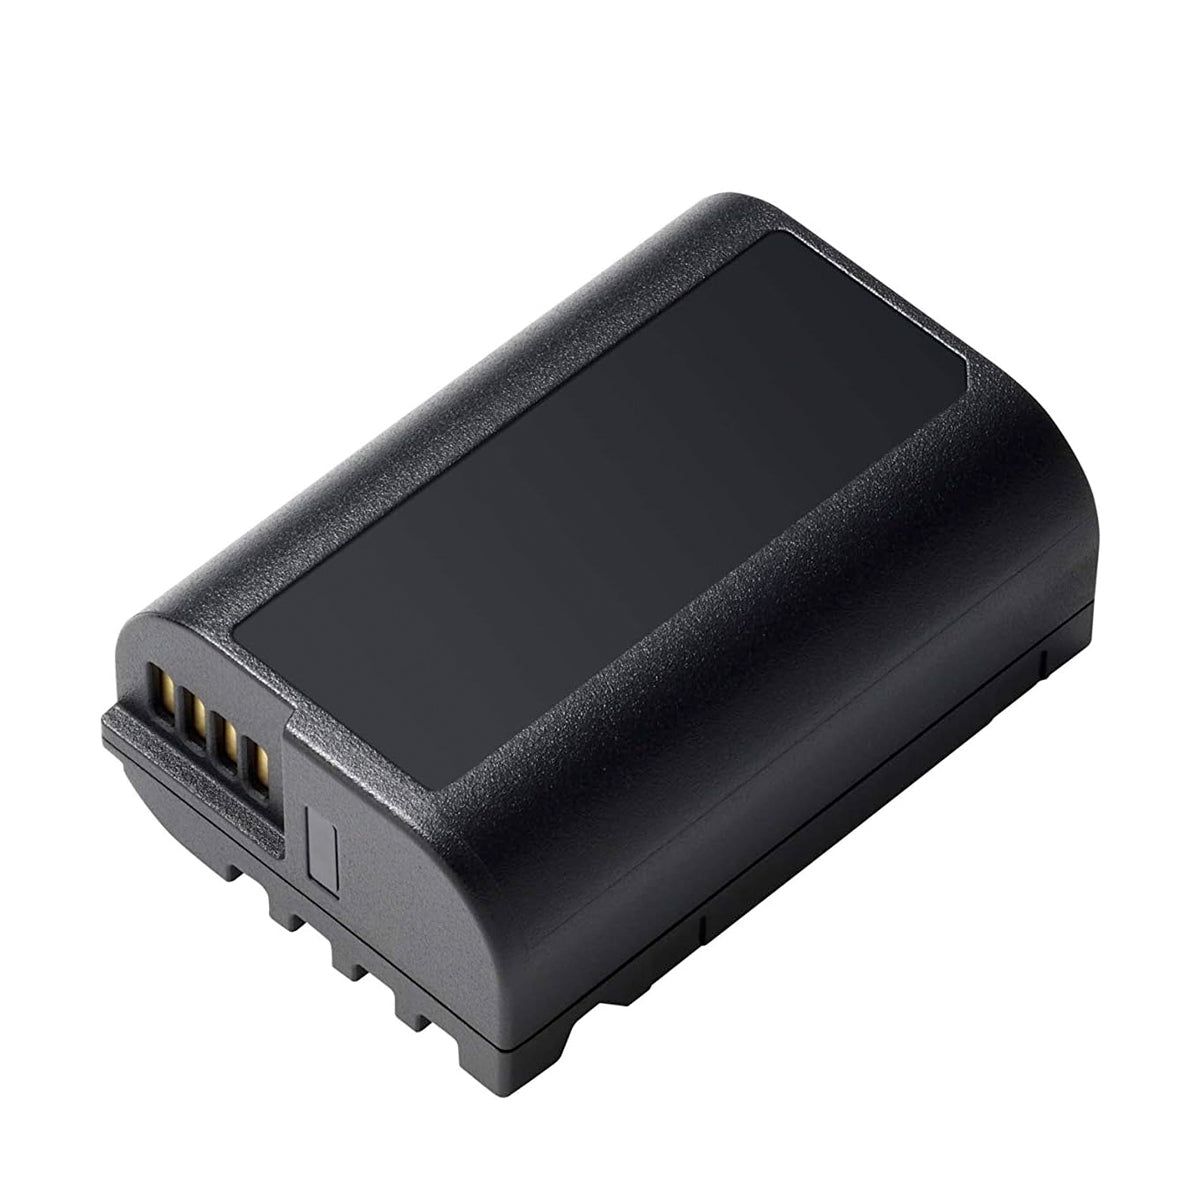 Rechargeable Lithium-Ion Battery - DMW-BLK22